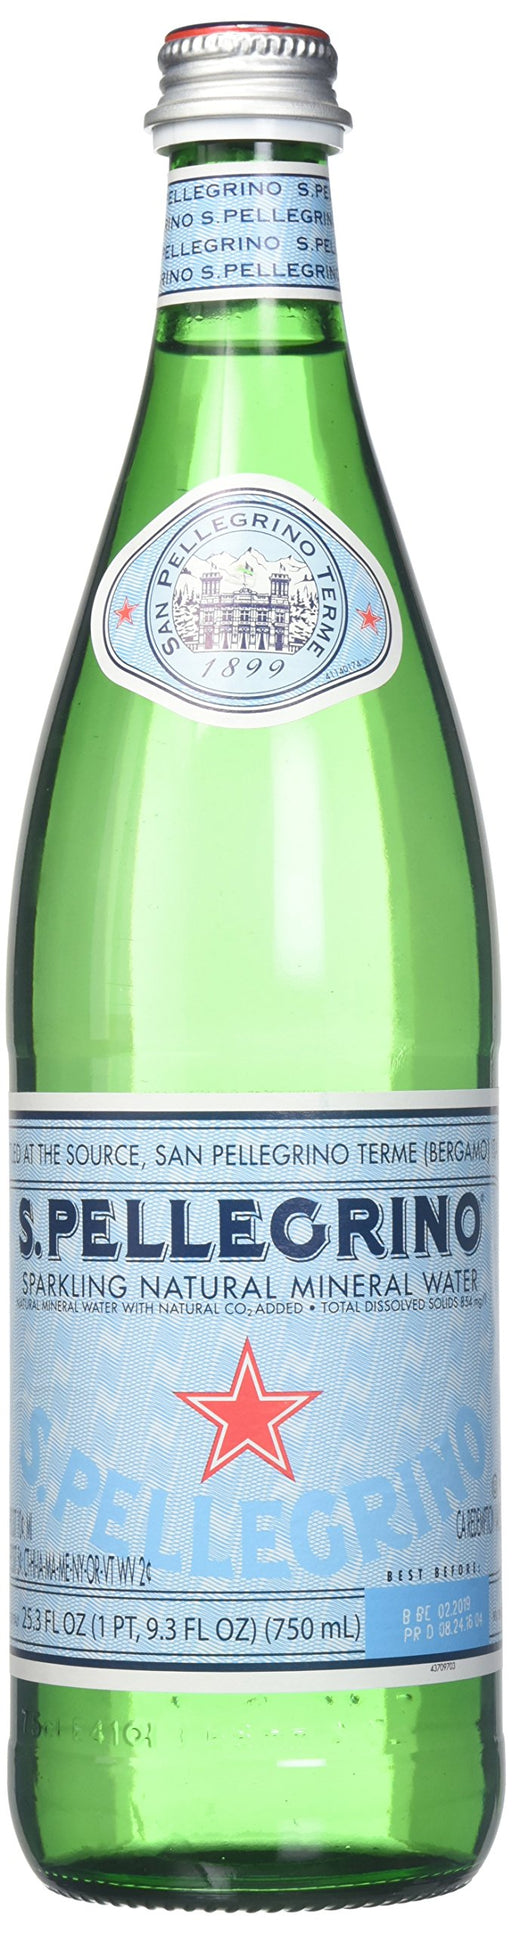 San Pellegrino Sparkling Natural Mineral Water, 25.3 Fluid Ounce (Pack of 12)